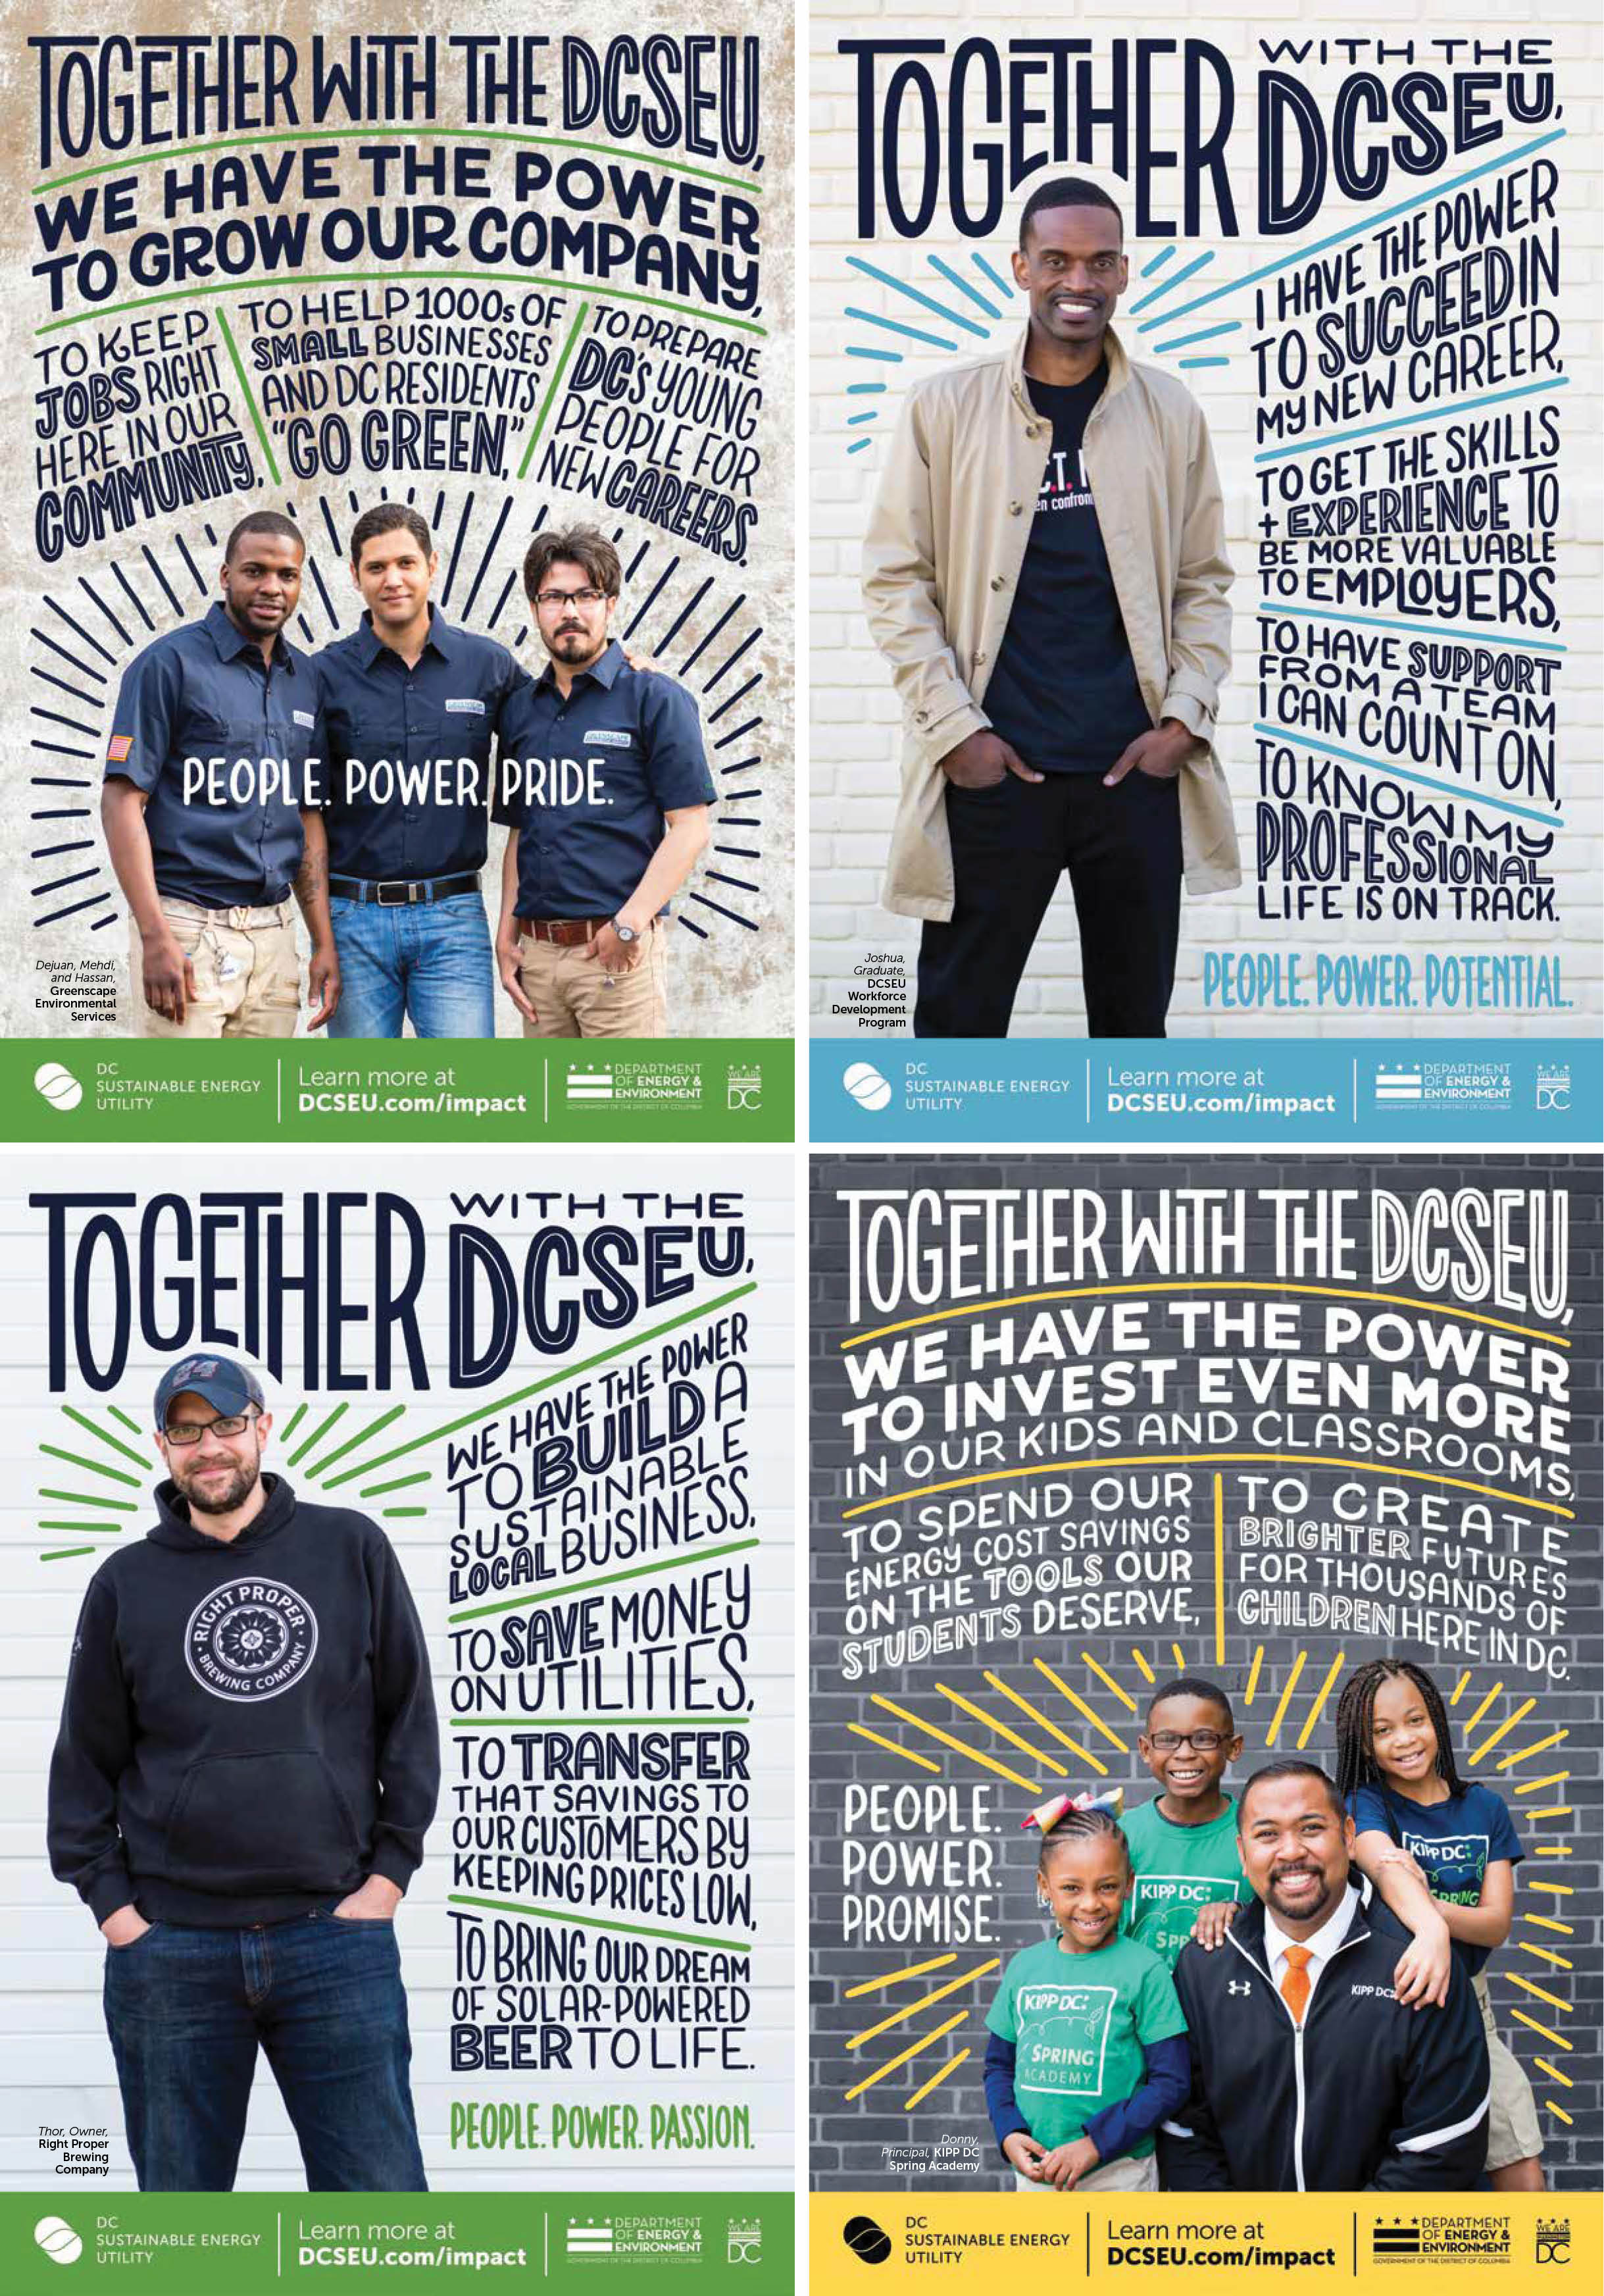 A series of four advertisements featuring participants in the DCSEU's programs. Handlettered testimonials surround each of them. First, a group of three men from Greenscapes Environmental stating: Together with the DCSEU, we have the power to grow our company; with the tagline: People. Power. Pride. Second, a man smiling at the camera stating: Together with the DCSEU, I have the power to succeed at my new career; with the tagline: People. Power. Potential. Third, the owner of Right Proper Brewing smiling at the cameral with his hands in his pockets stating: Together with the DCSEU, we have the power to build a sustainable business; with the tagline: People. Power. Passion. Lastly, the principal of a KIPP DC school surrounded by three students smiling at the camera stating:Together with the DCSEU, we have the power to invest even more in our kids and classrooms; with the tagline: People. Power. Promise.